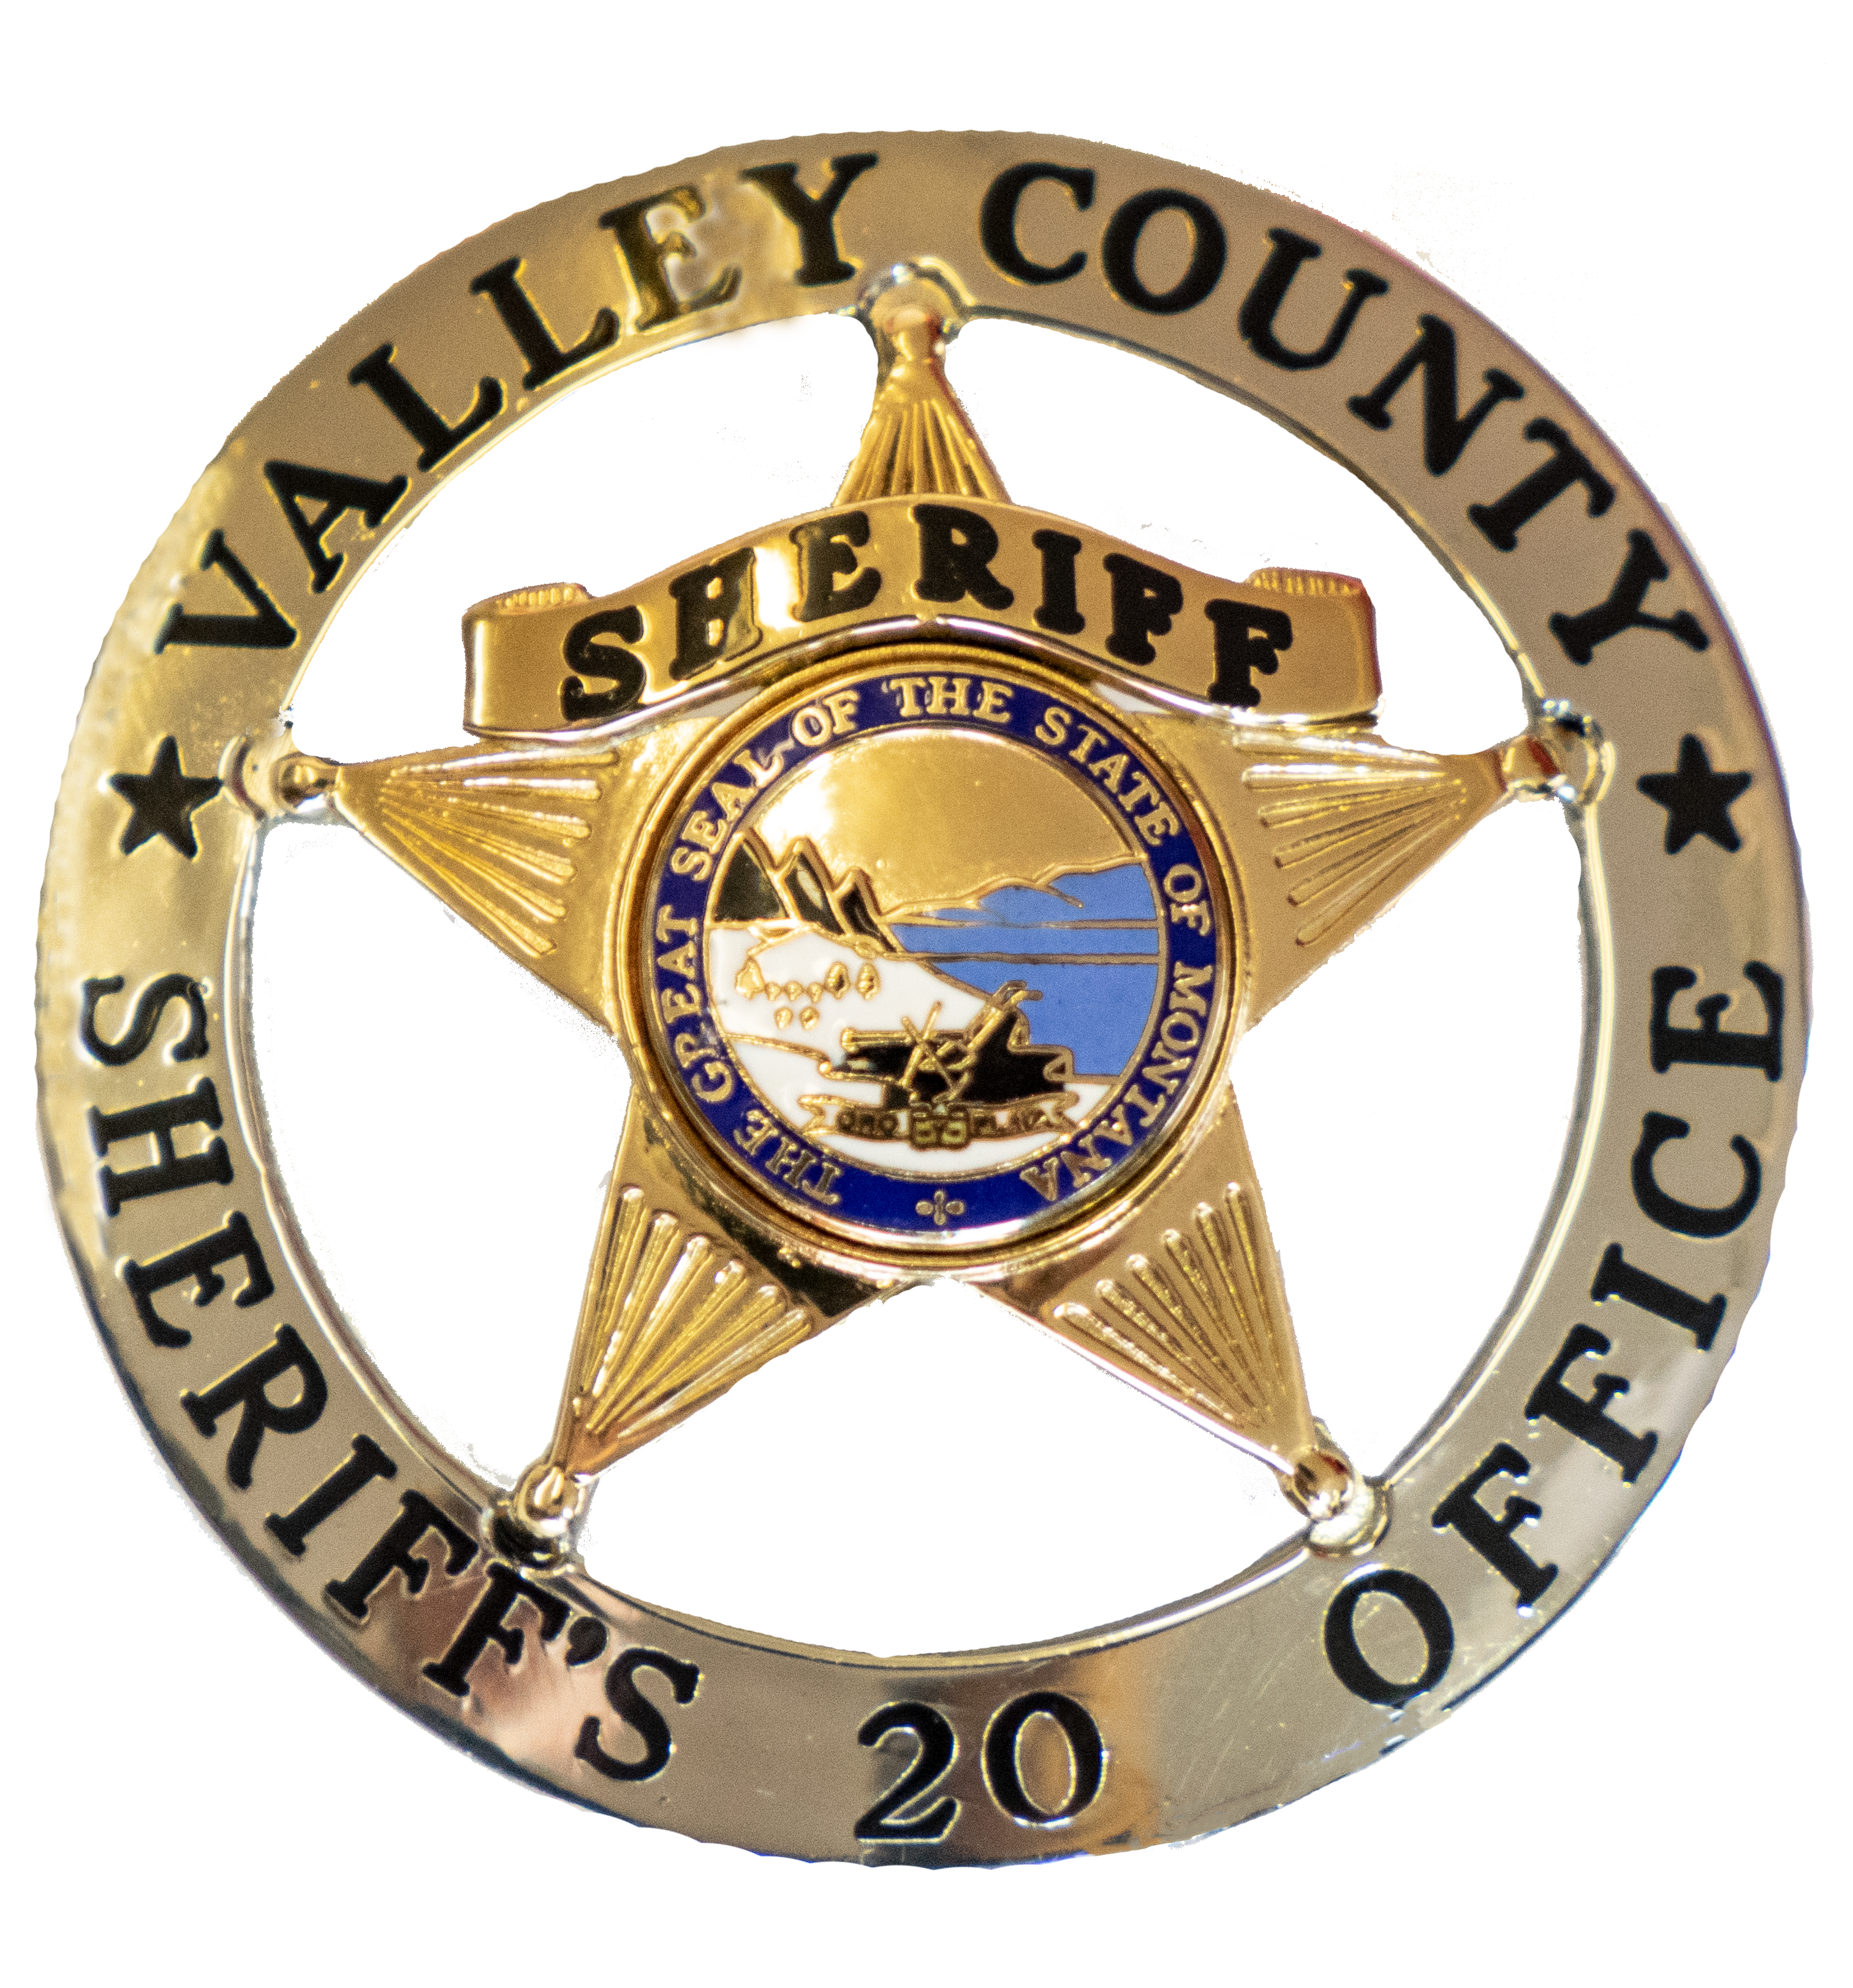 Valley County Sheriff's Office, MT 